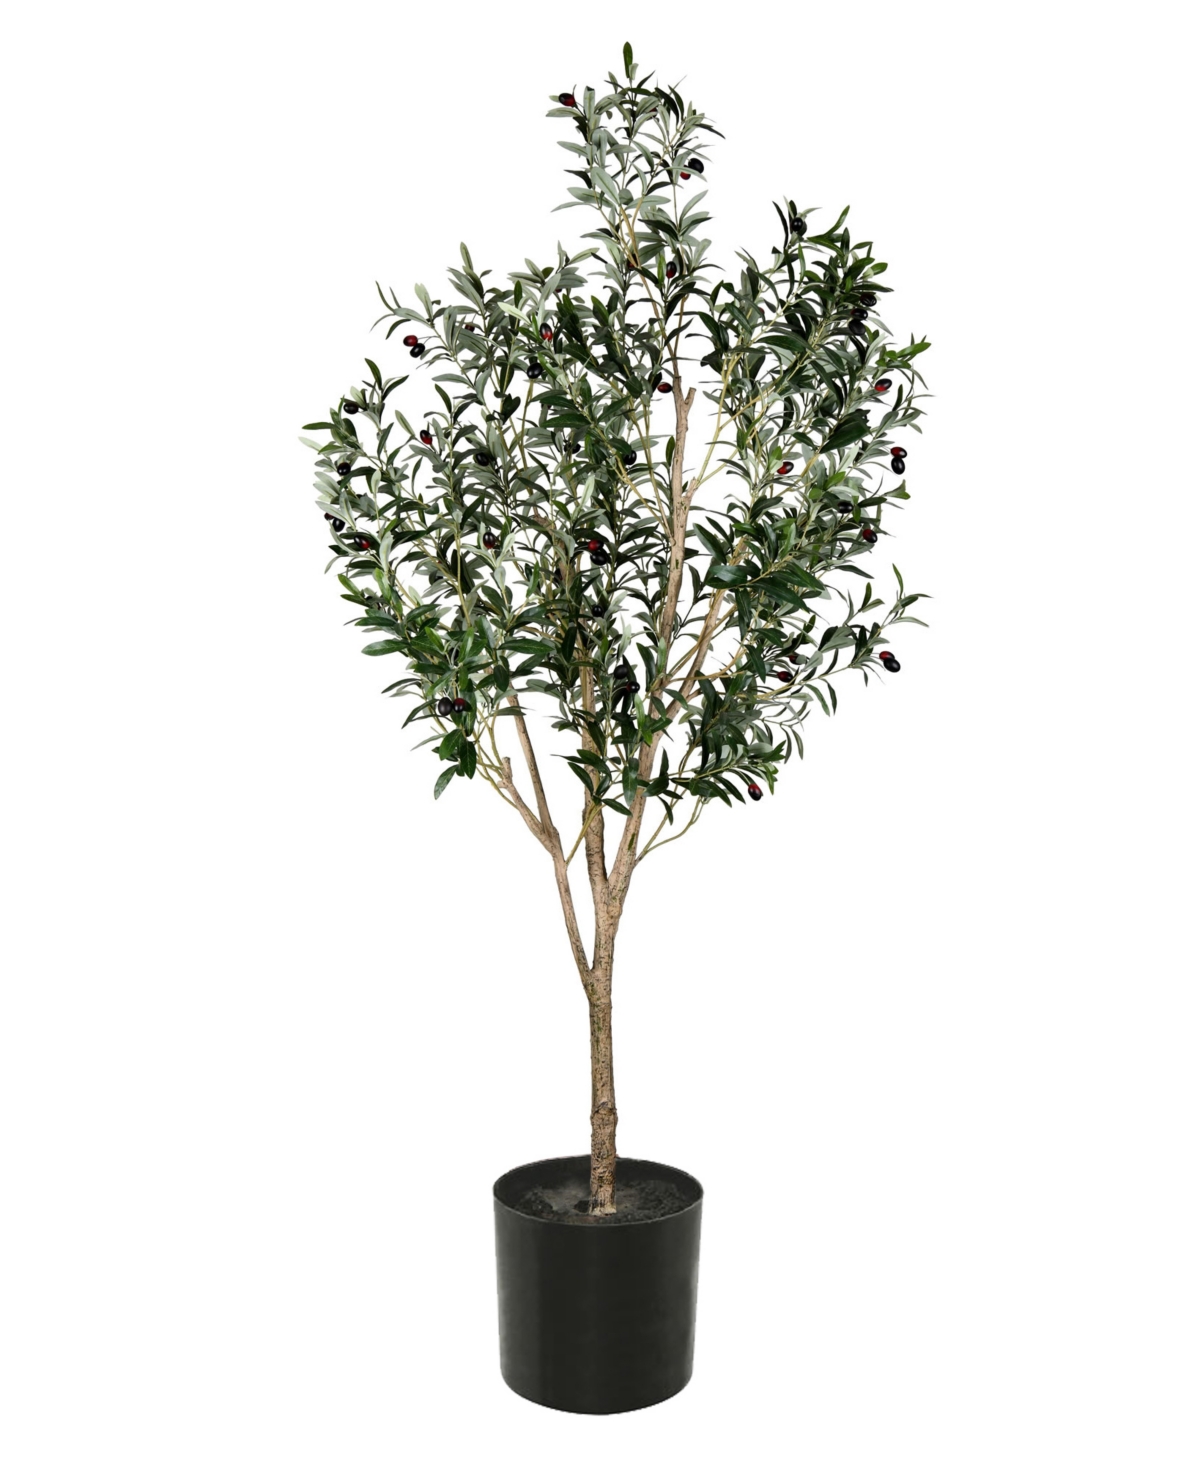 72" Artificial Green Olive Tree in Black Planters Pot - Green